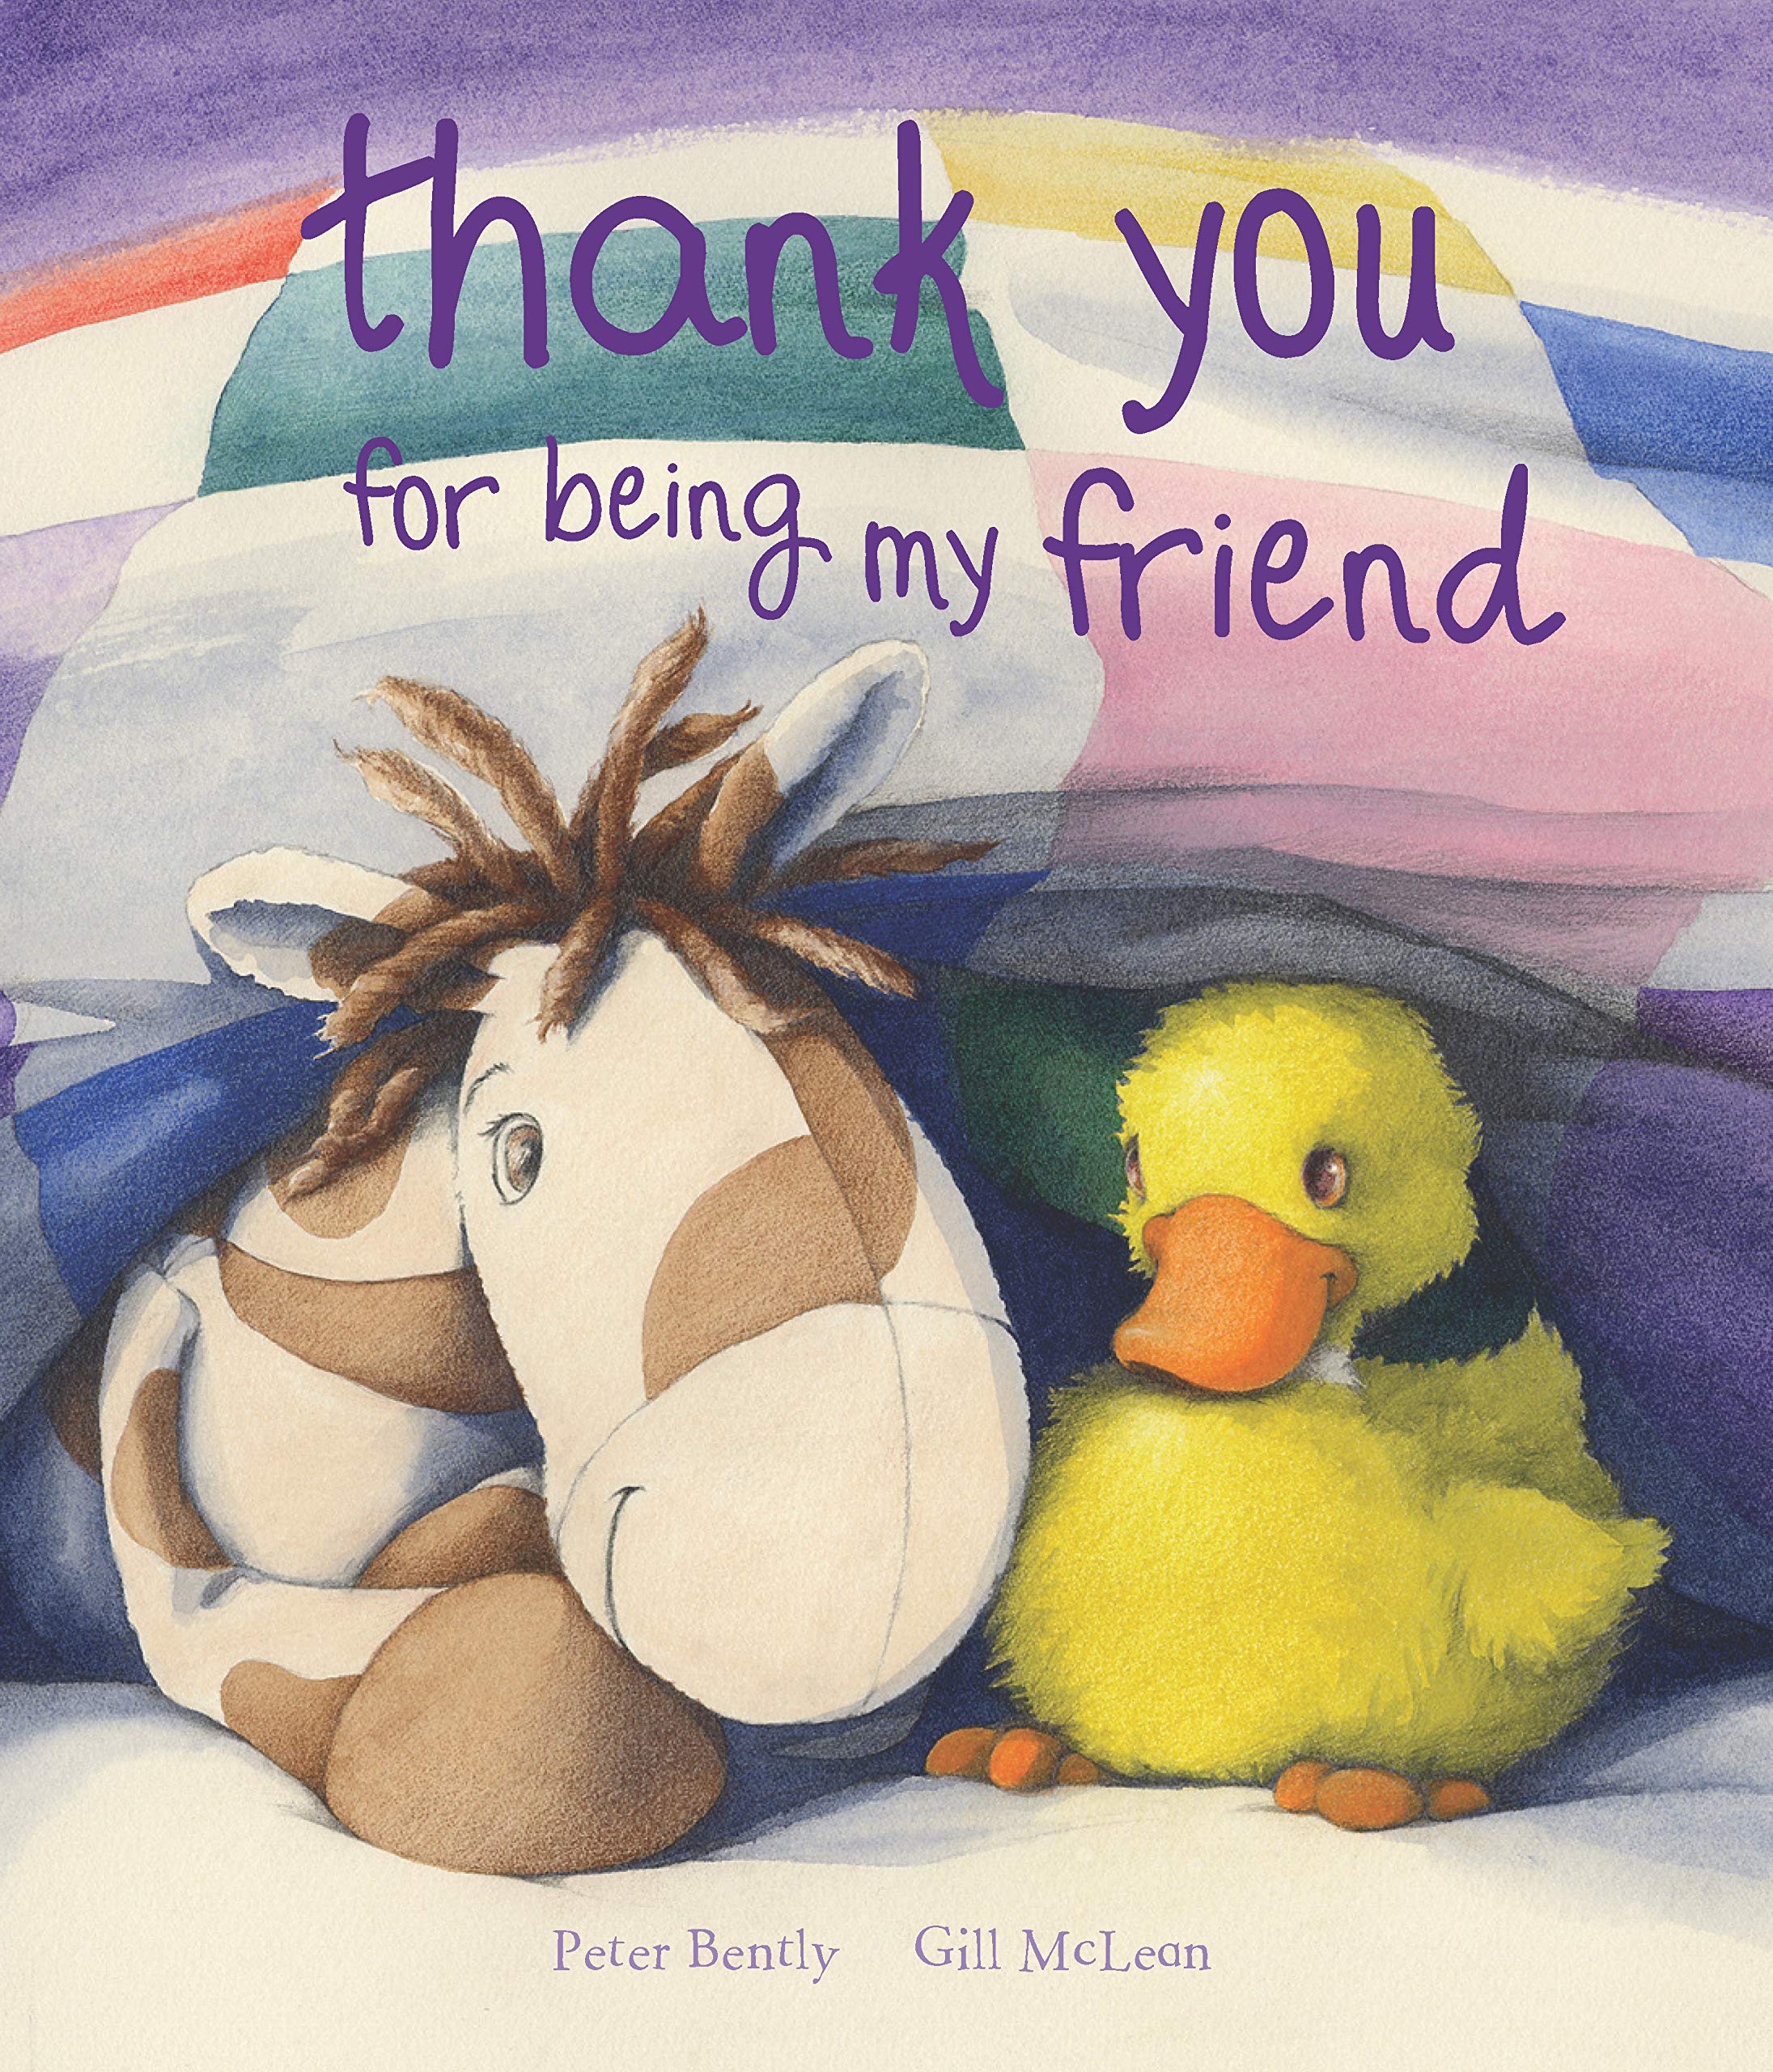 IMG : Thank you for being my friend